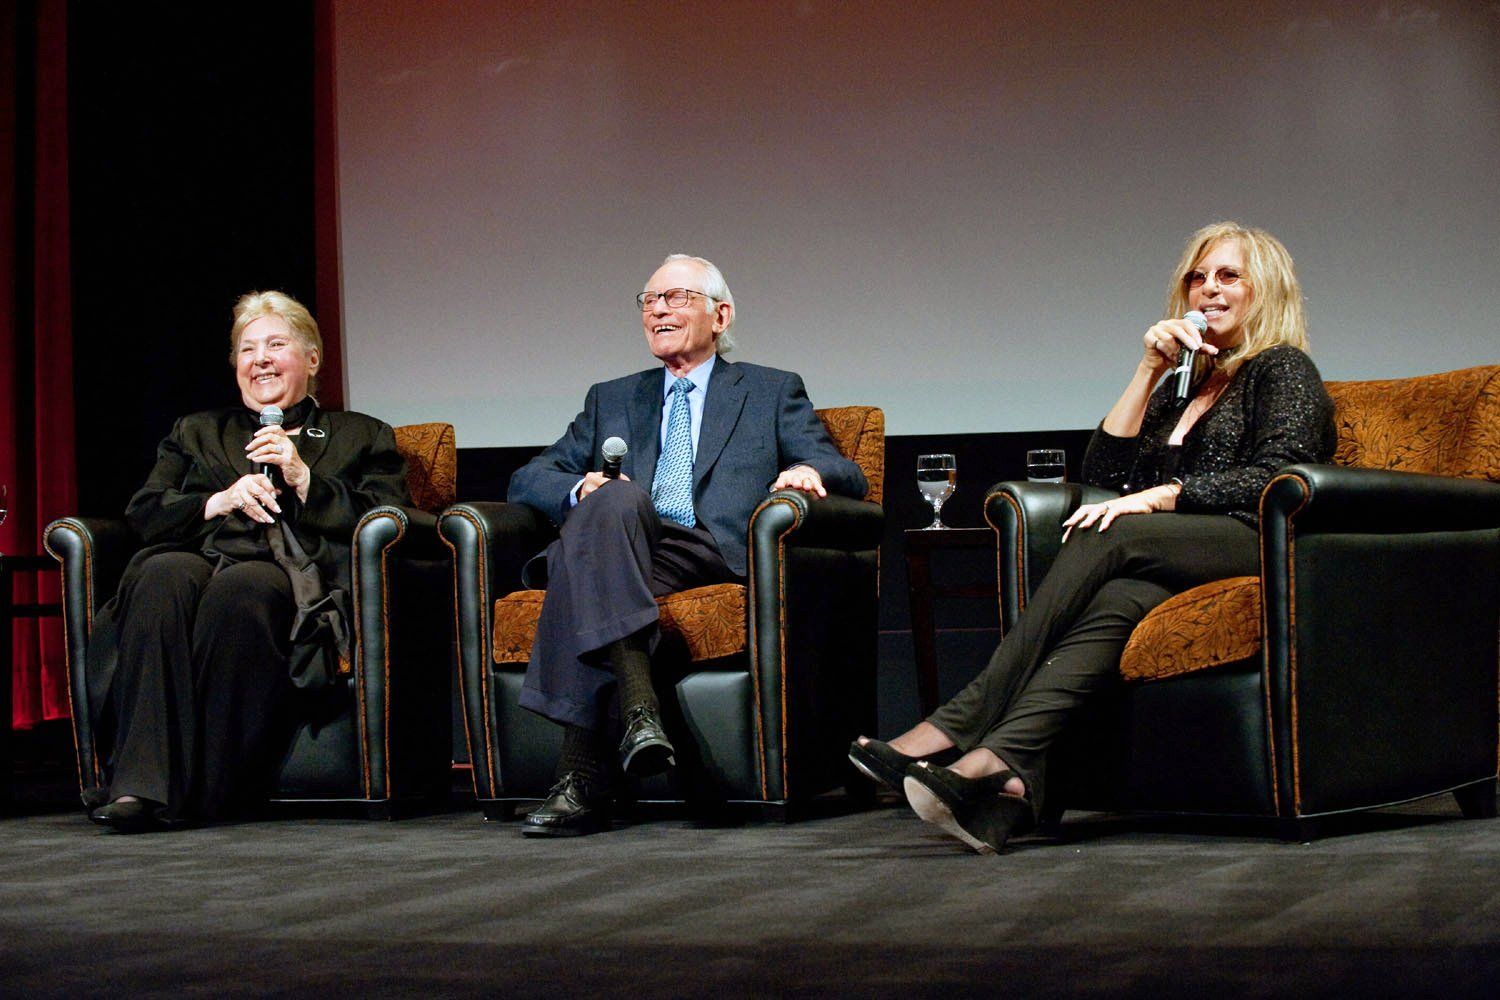 Marilyn Bergman, Alan Bergman, and Barbra Streisand at the 2009 event where she announced her plans to record an album of their songs.